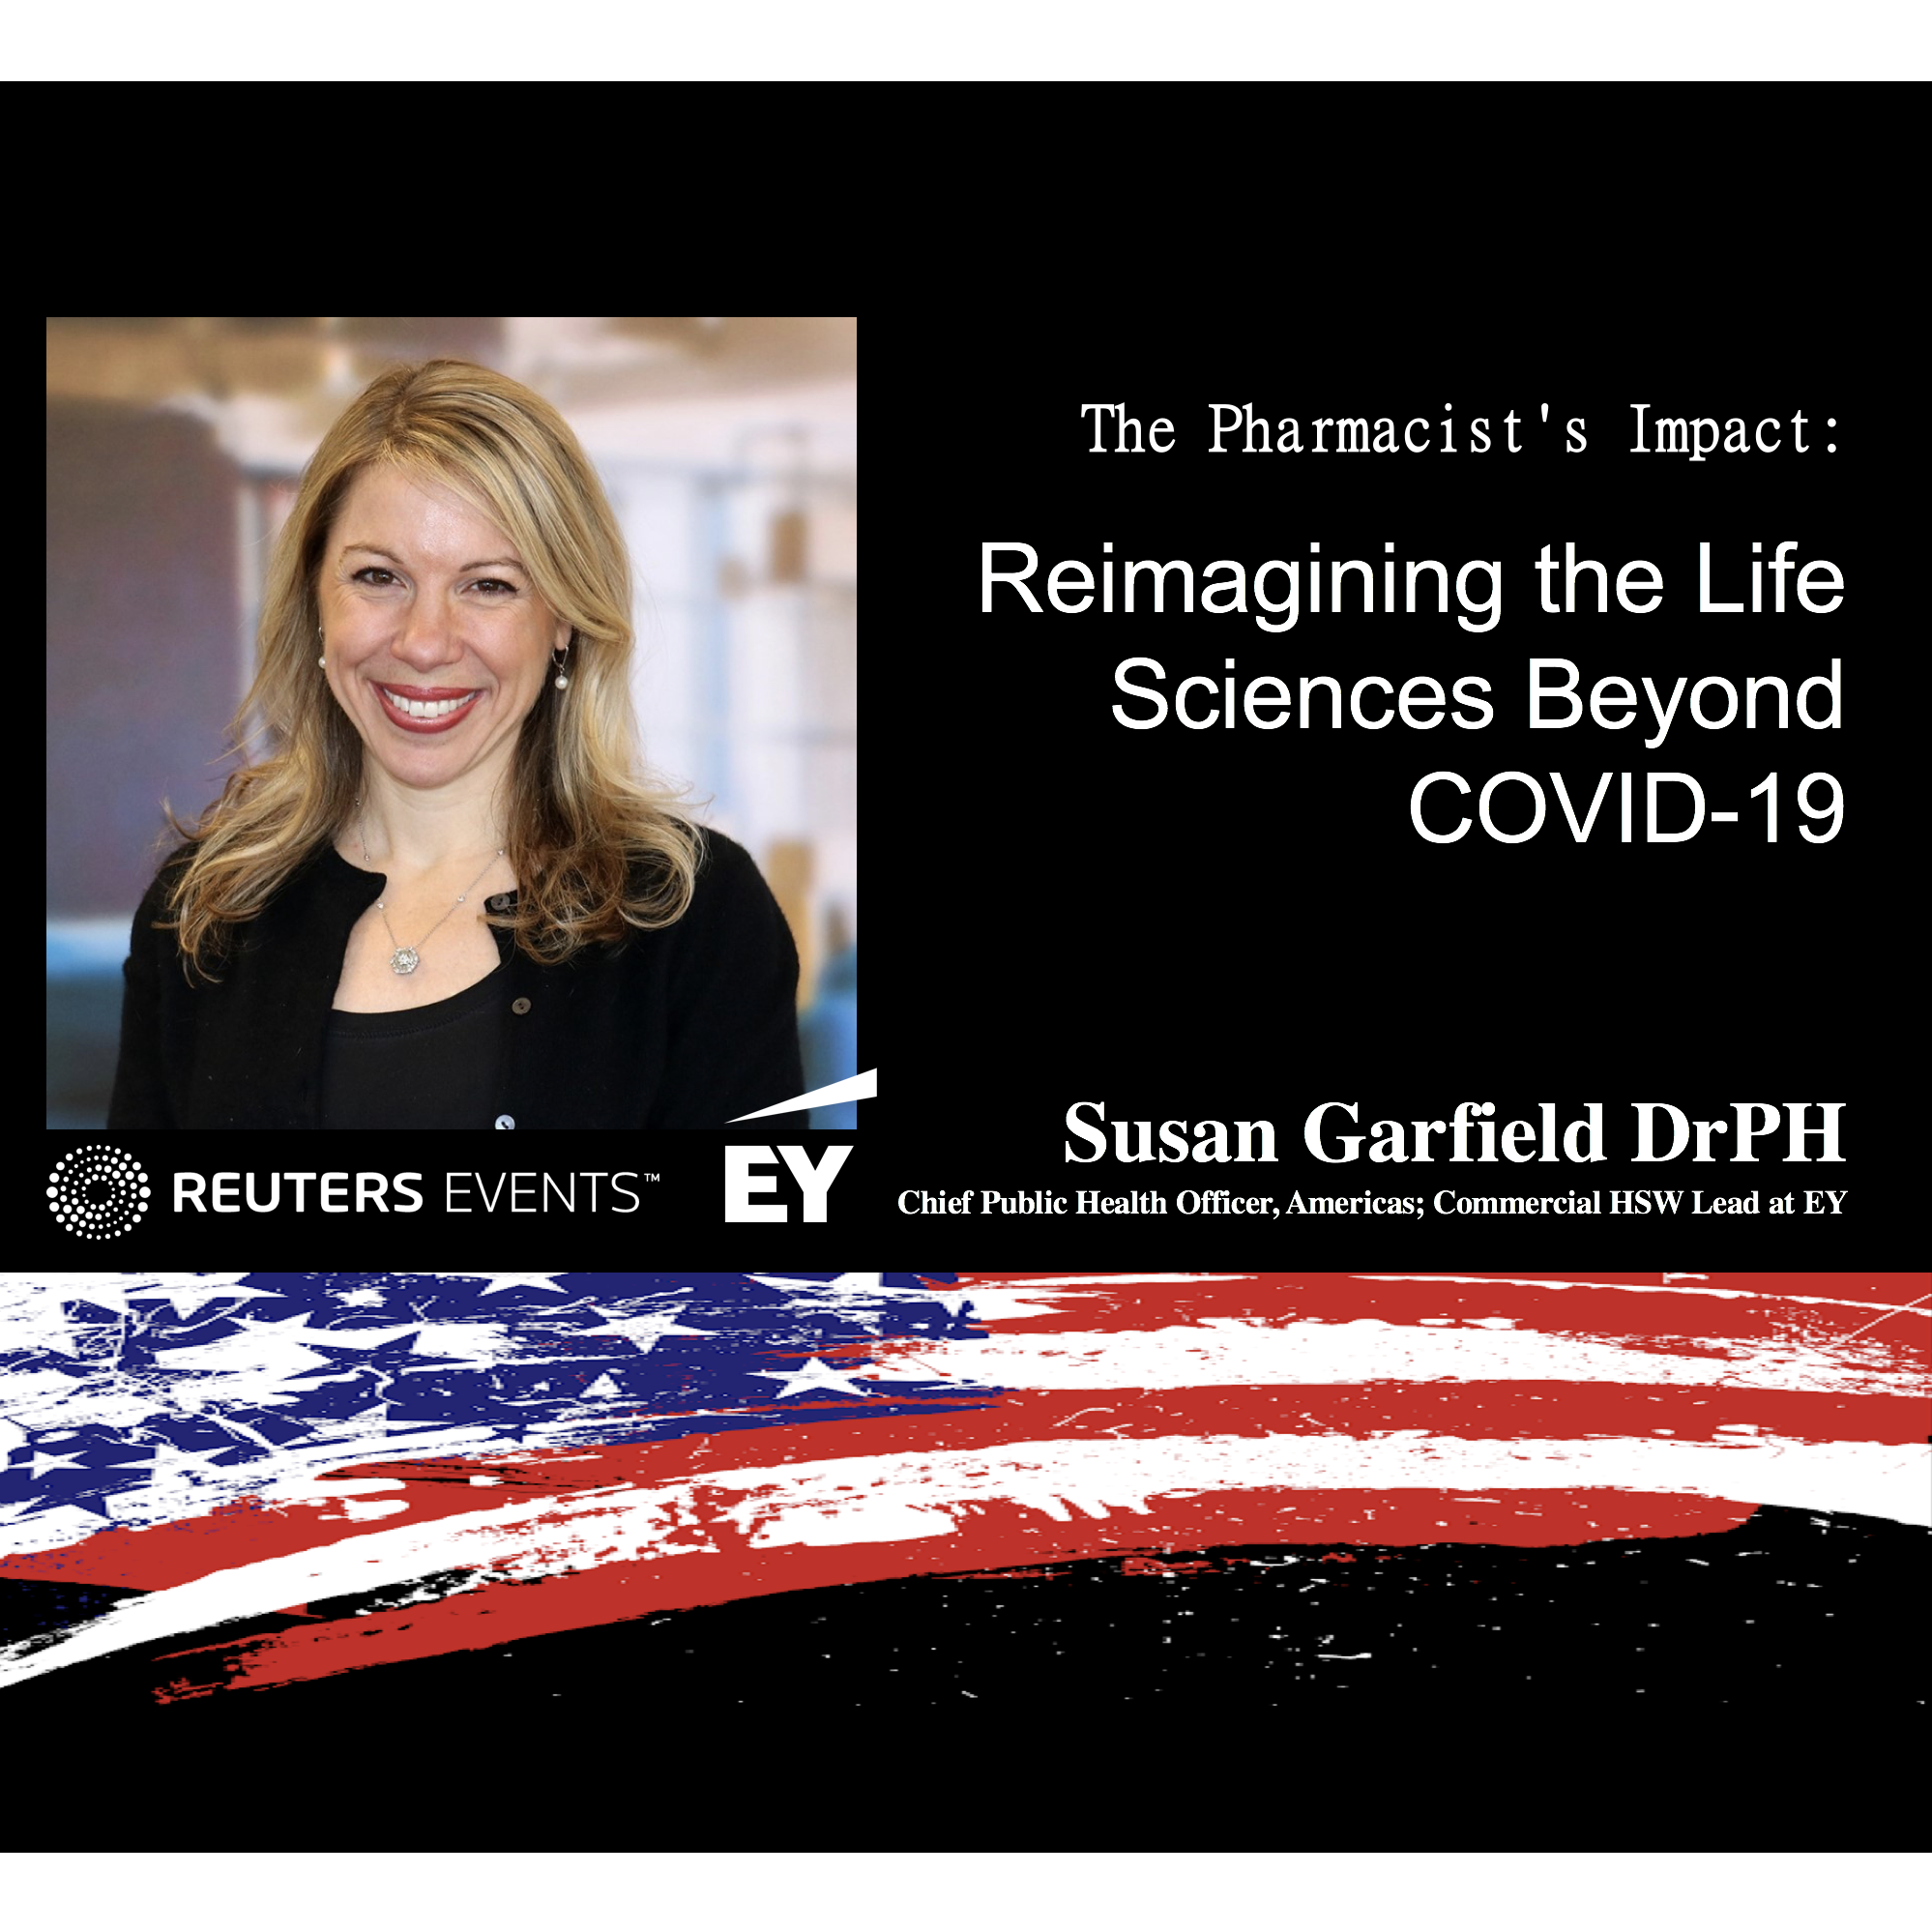 The Pharmacist's Impact: Reimagined the Life Sciences Beyond COVID-19